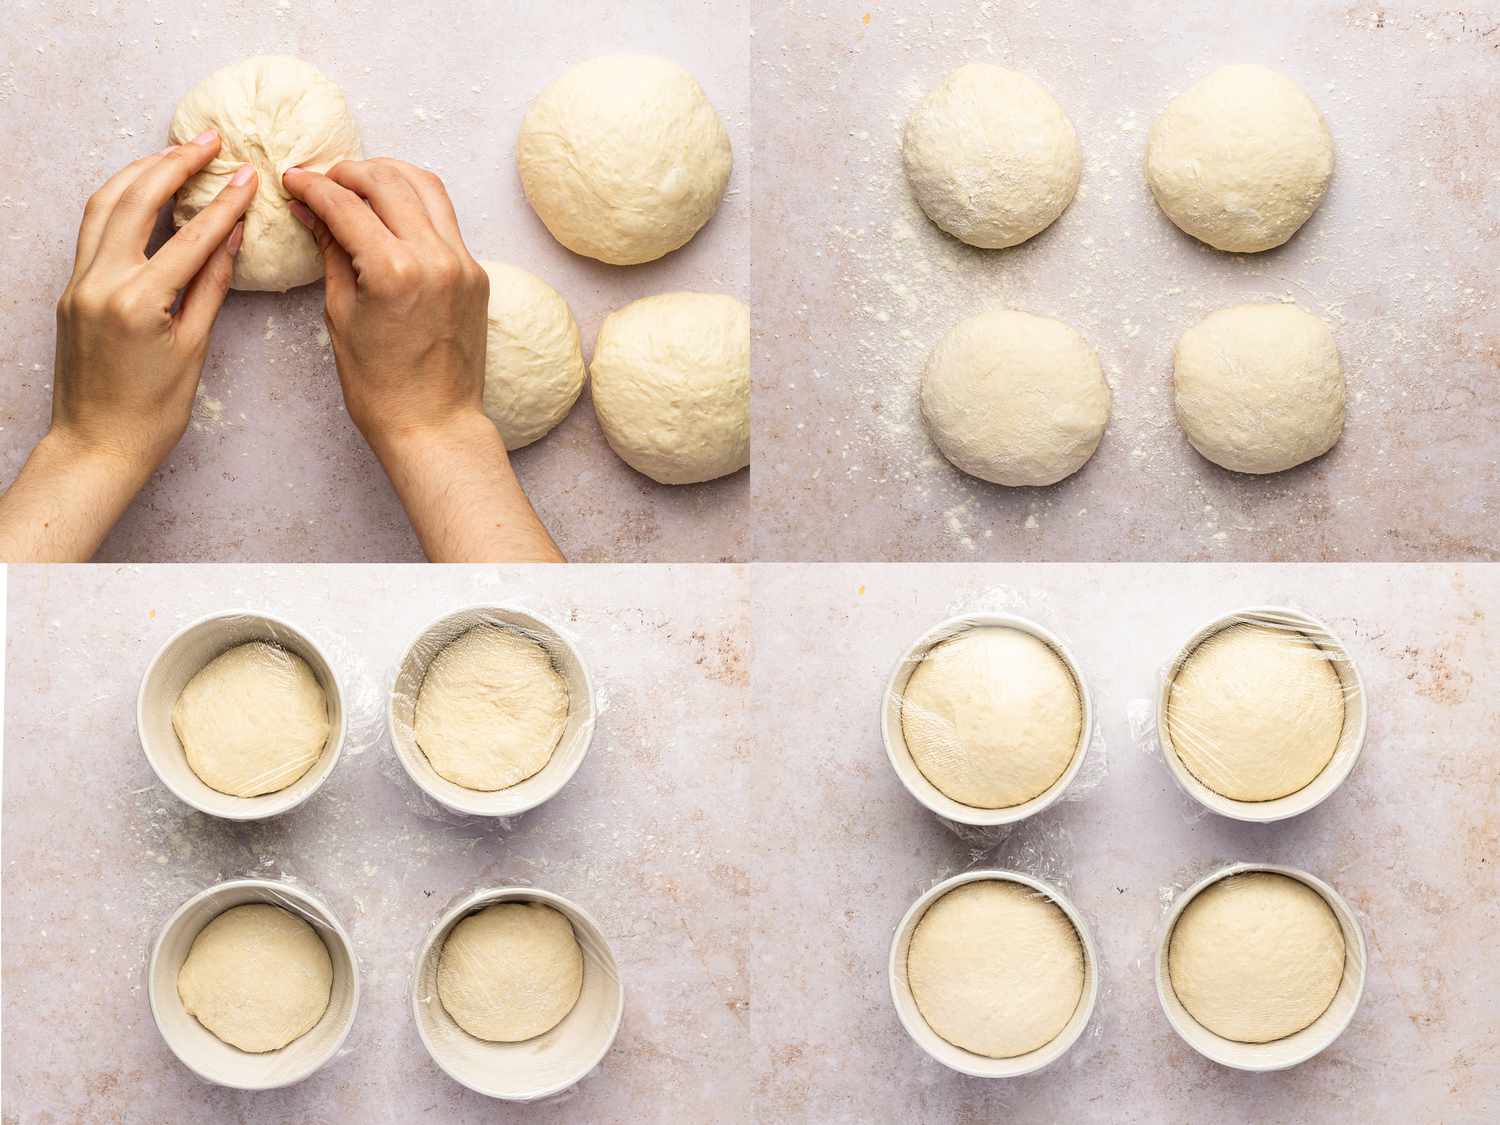 Pinching dough shut at bottom of the ball and dough placed into 4 separate bowls and covered tightly with plastic wrap